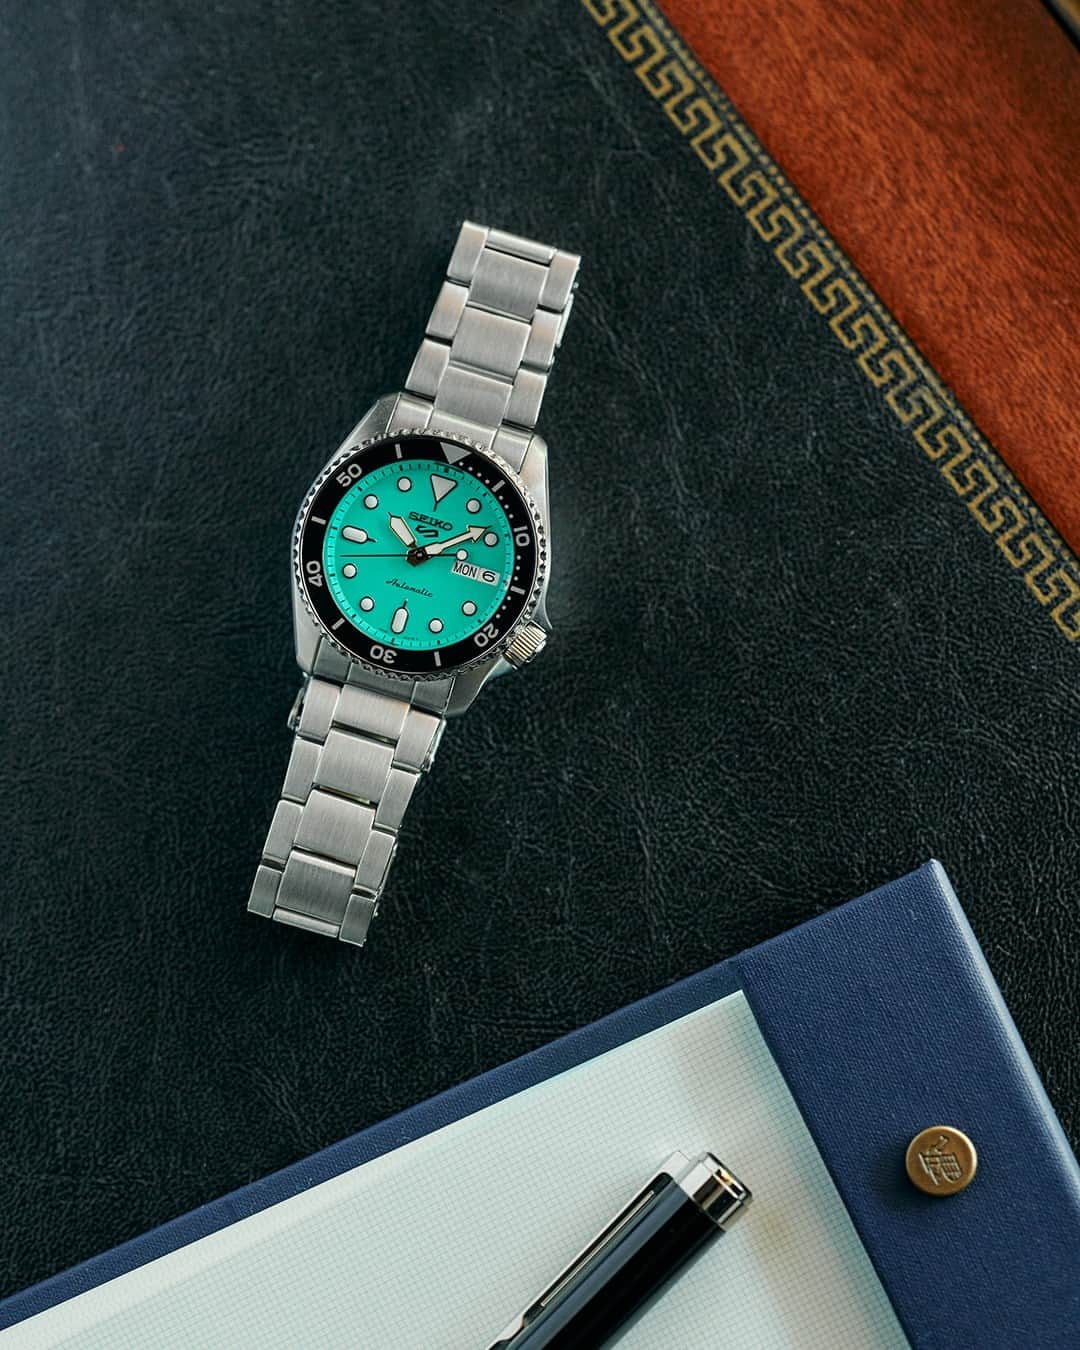 Seiko Watchesのインスタグラム：「It's Giving Teal & Stainless Steel 🟢 - Sporting a vintage style, the Seiko 5 Sports SKX Mid-Size collection has the perfect accessory to take your wrist game from simple to stunning. The vibrant green dial, framed by a black uni-directional rotating elapsed timing bezel, helps your look stand out while keeping you always on point.  #SRPK33 #Seiko #Seiko5Sports #ShowYourStyle」